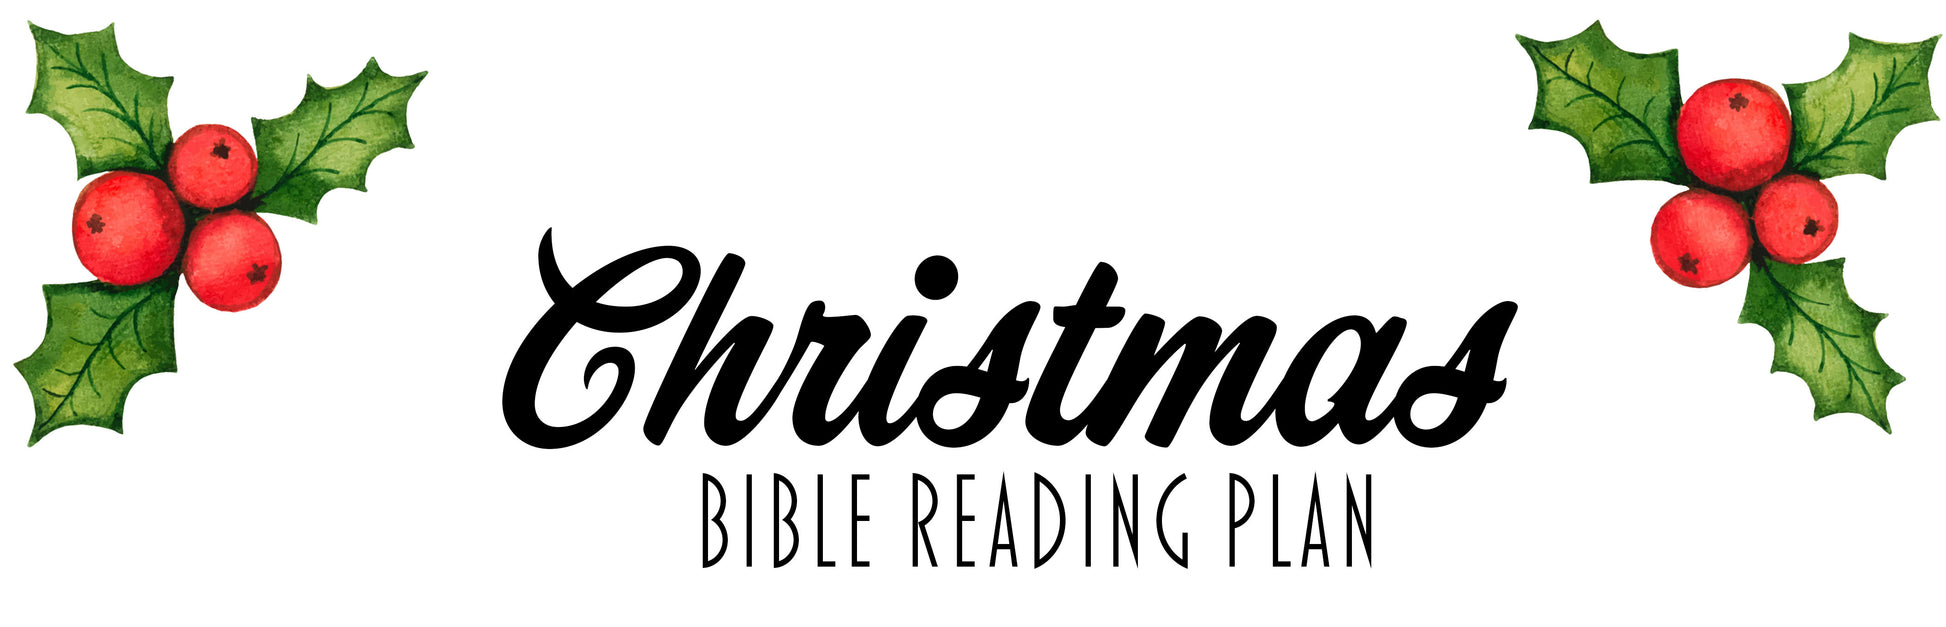 2018 Christmas Reading Plan - Bibles and Coffee